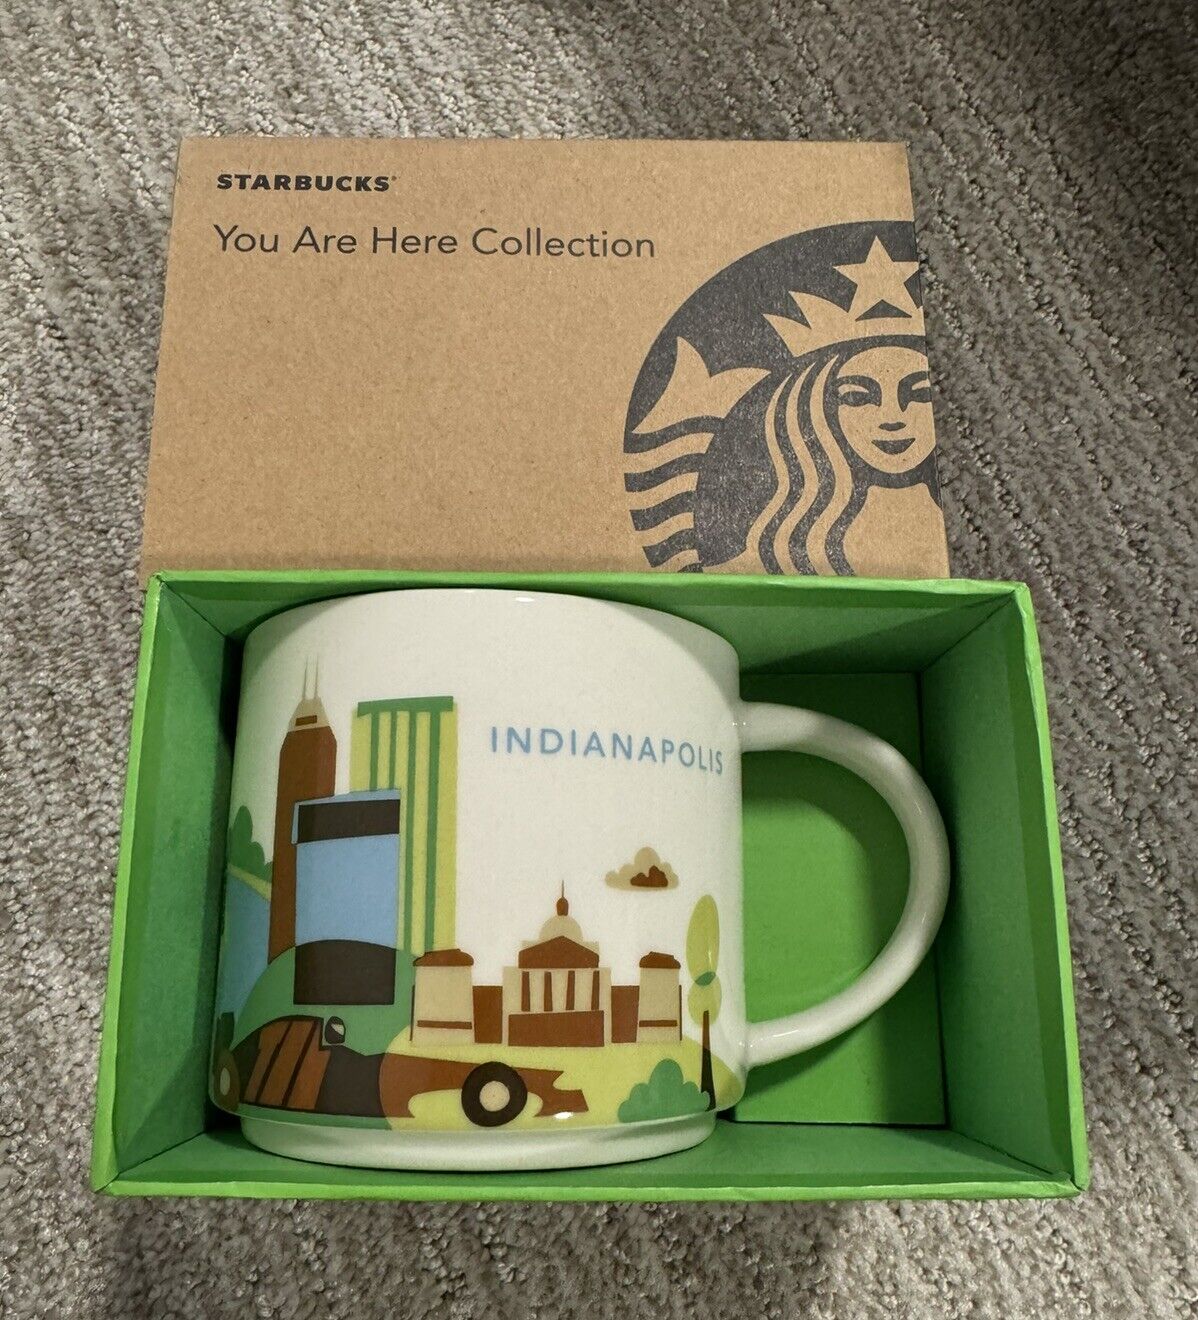 Starbucks YAH Indianapolis Coffee Mug Cup 14oz. - You are Here - Brand New